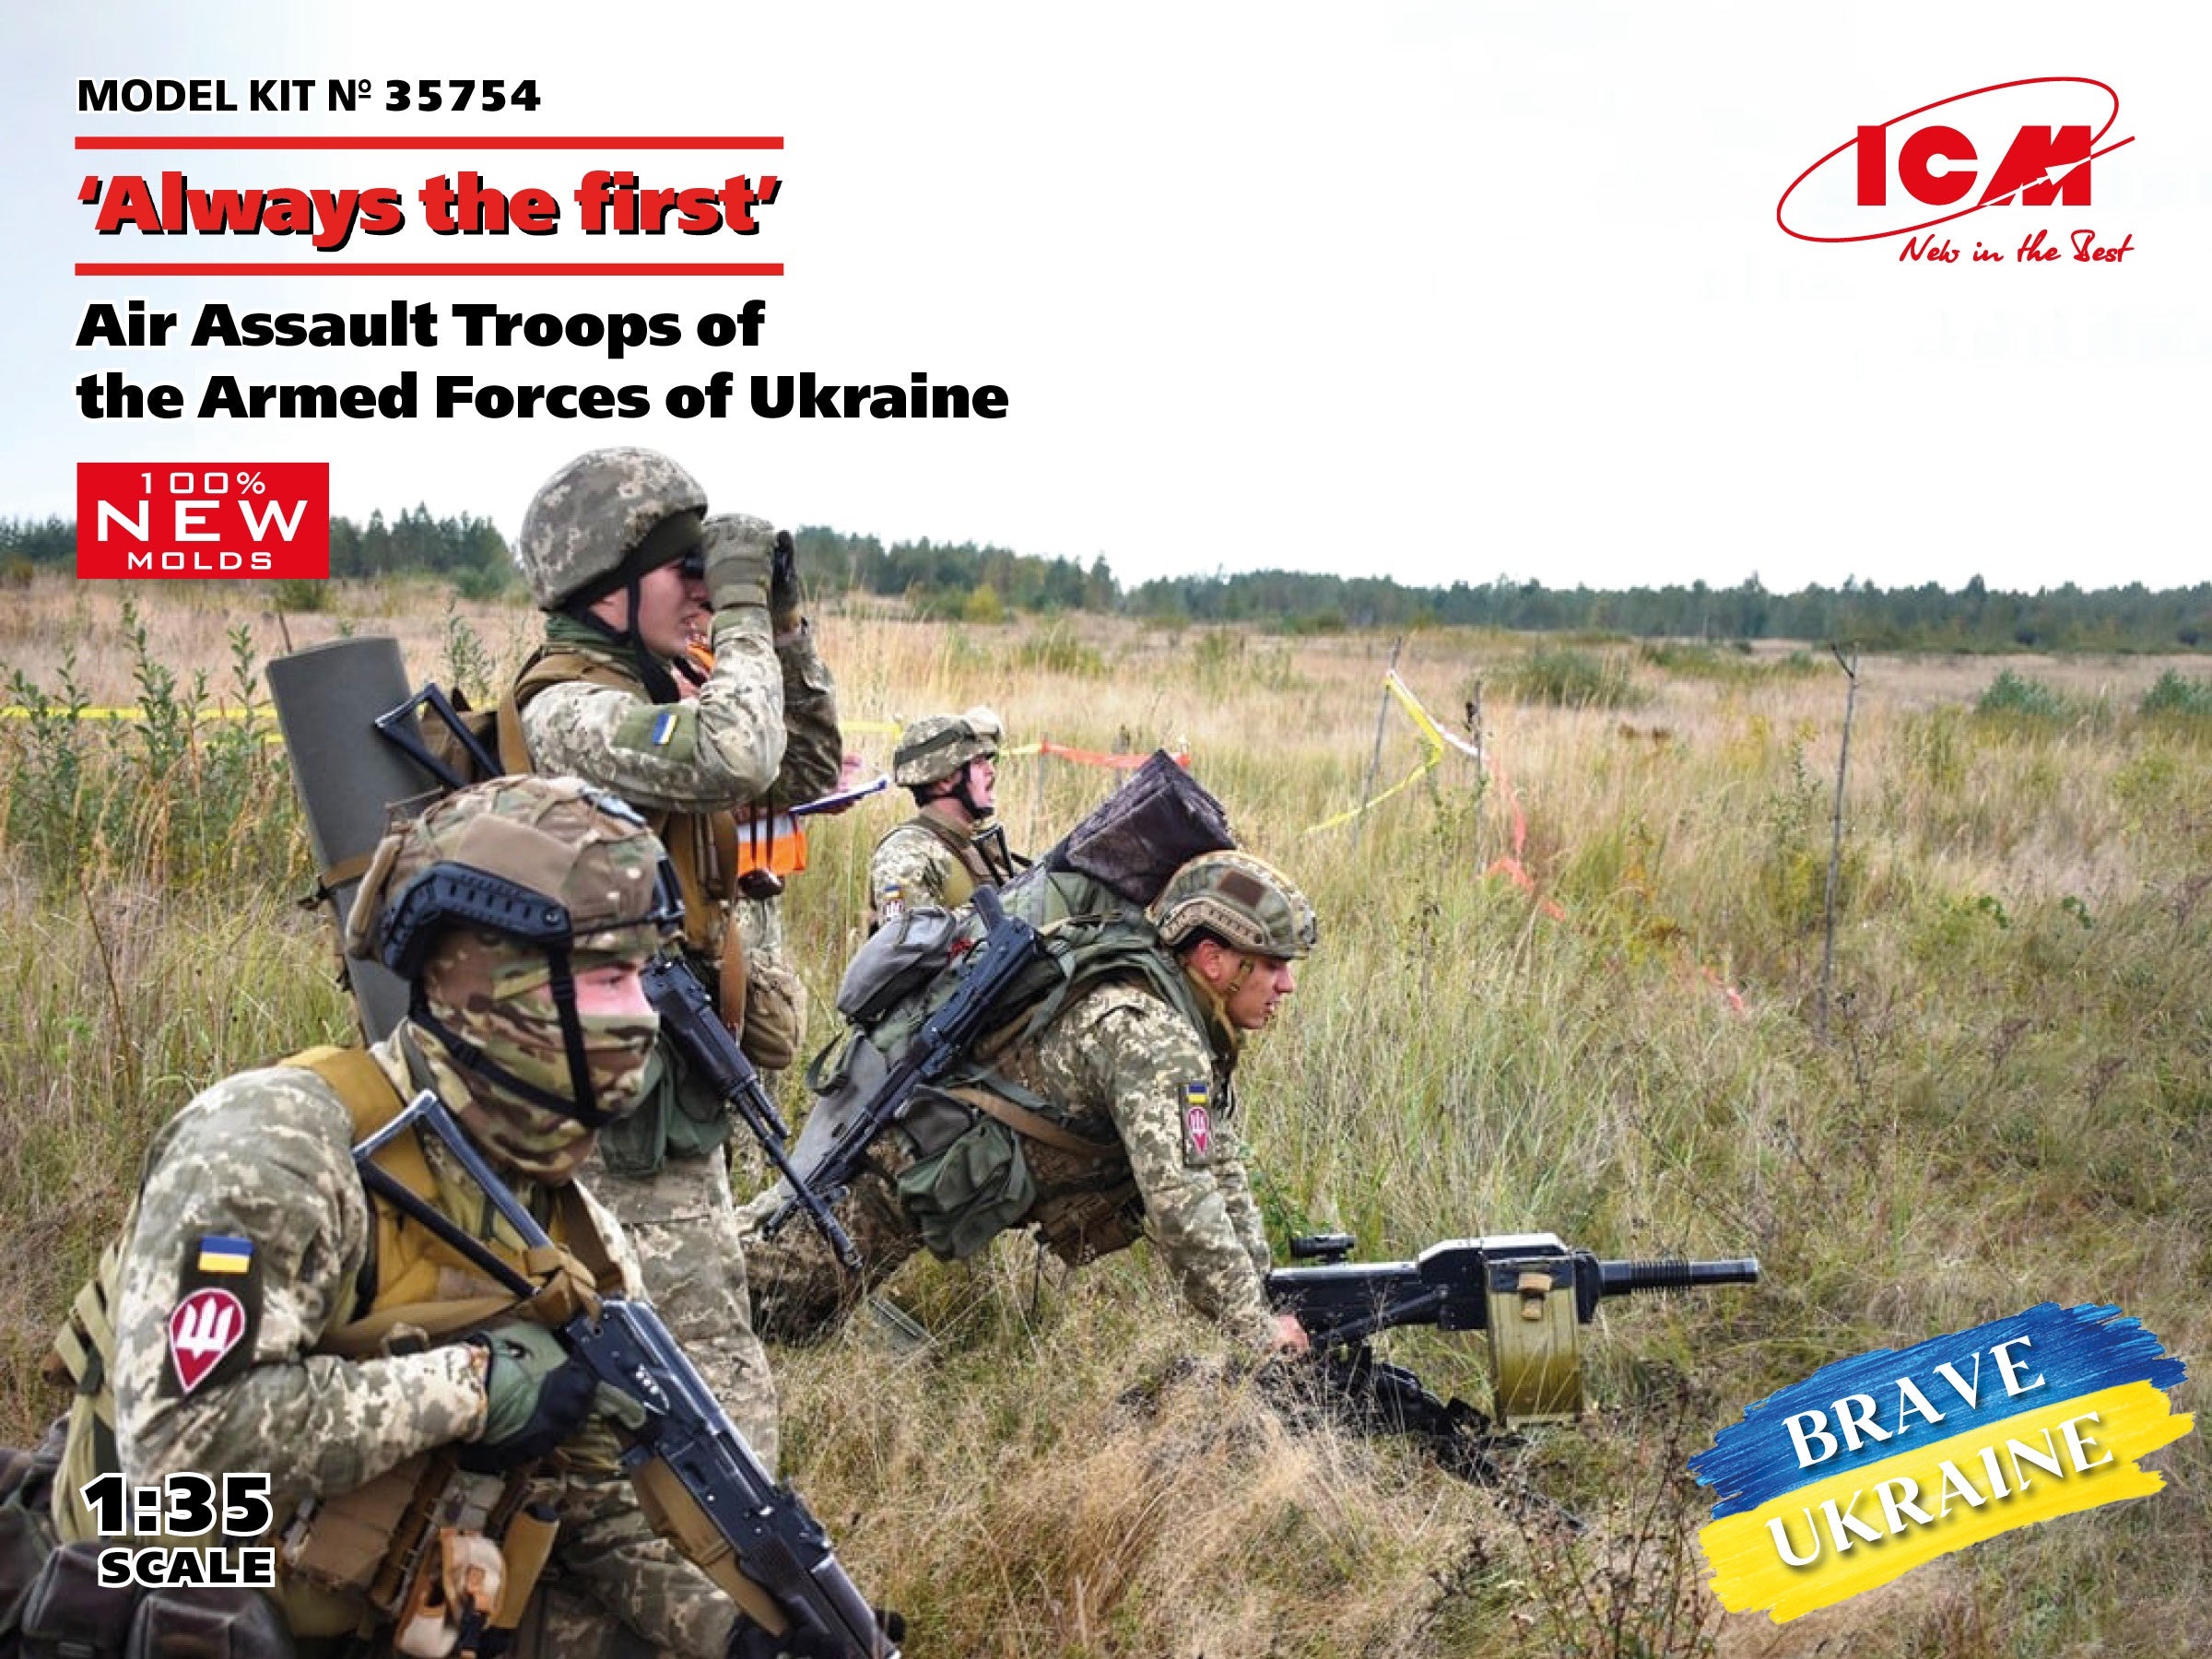 Air Assault Troops of the Armed Forces of Ukraine "Always the first" (4 figures) (100% new molds) 1/35 #35754 by ICM